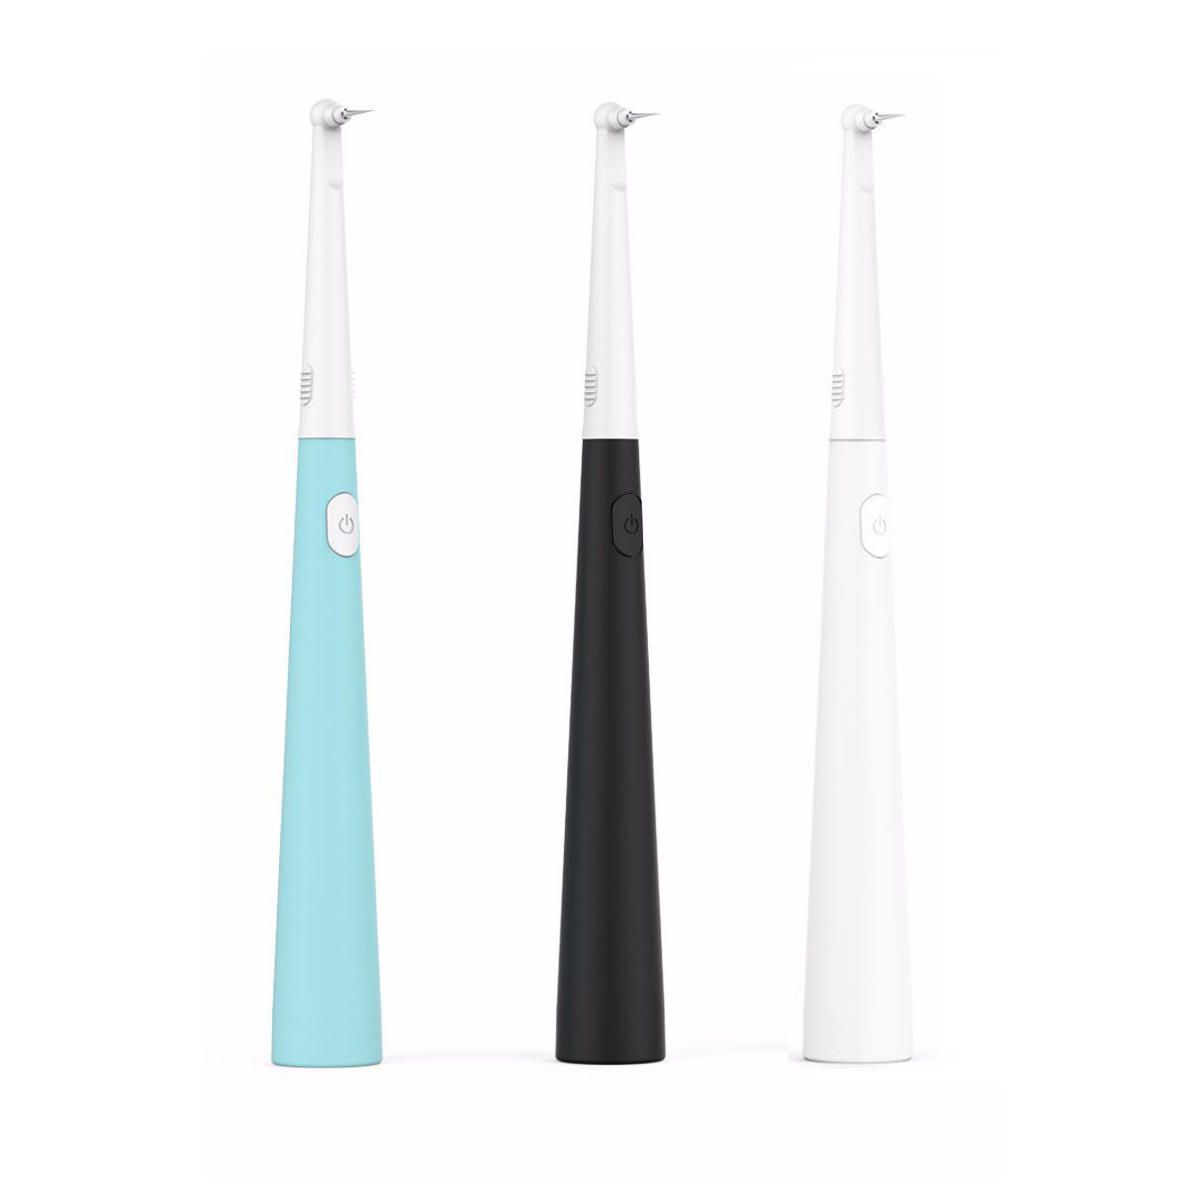 

3 Modes Ultrasonic Vibration Electric Tooth Oral Irrigator Waterproof Dental Teeth Cleaning Whitening Cleaner Plaque Rem